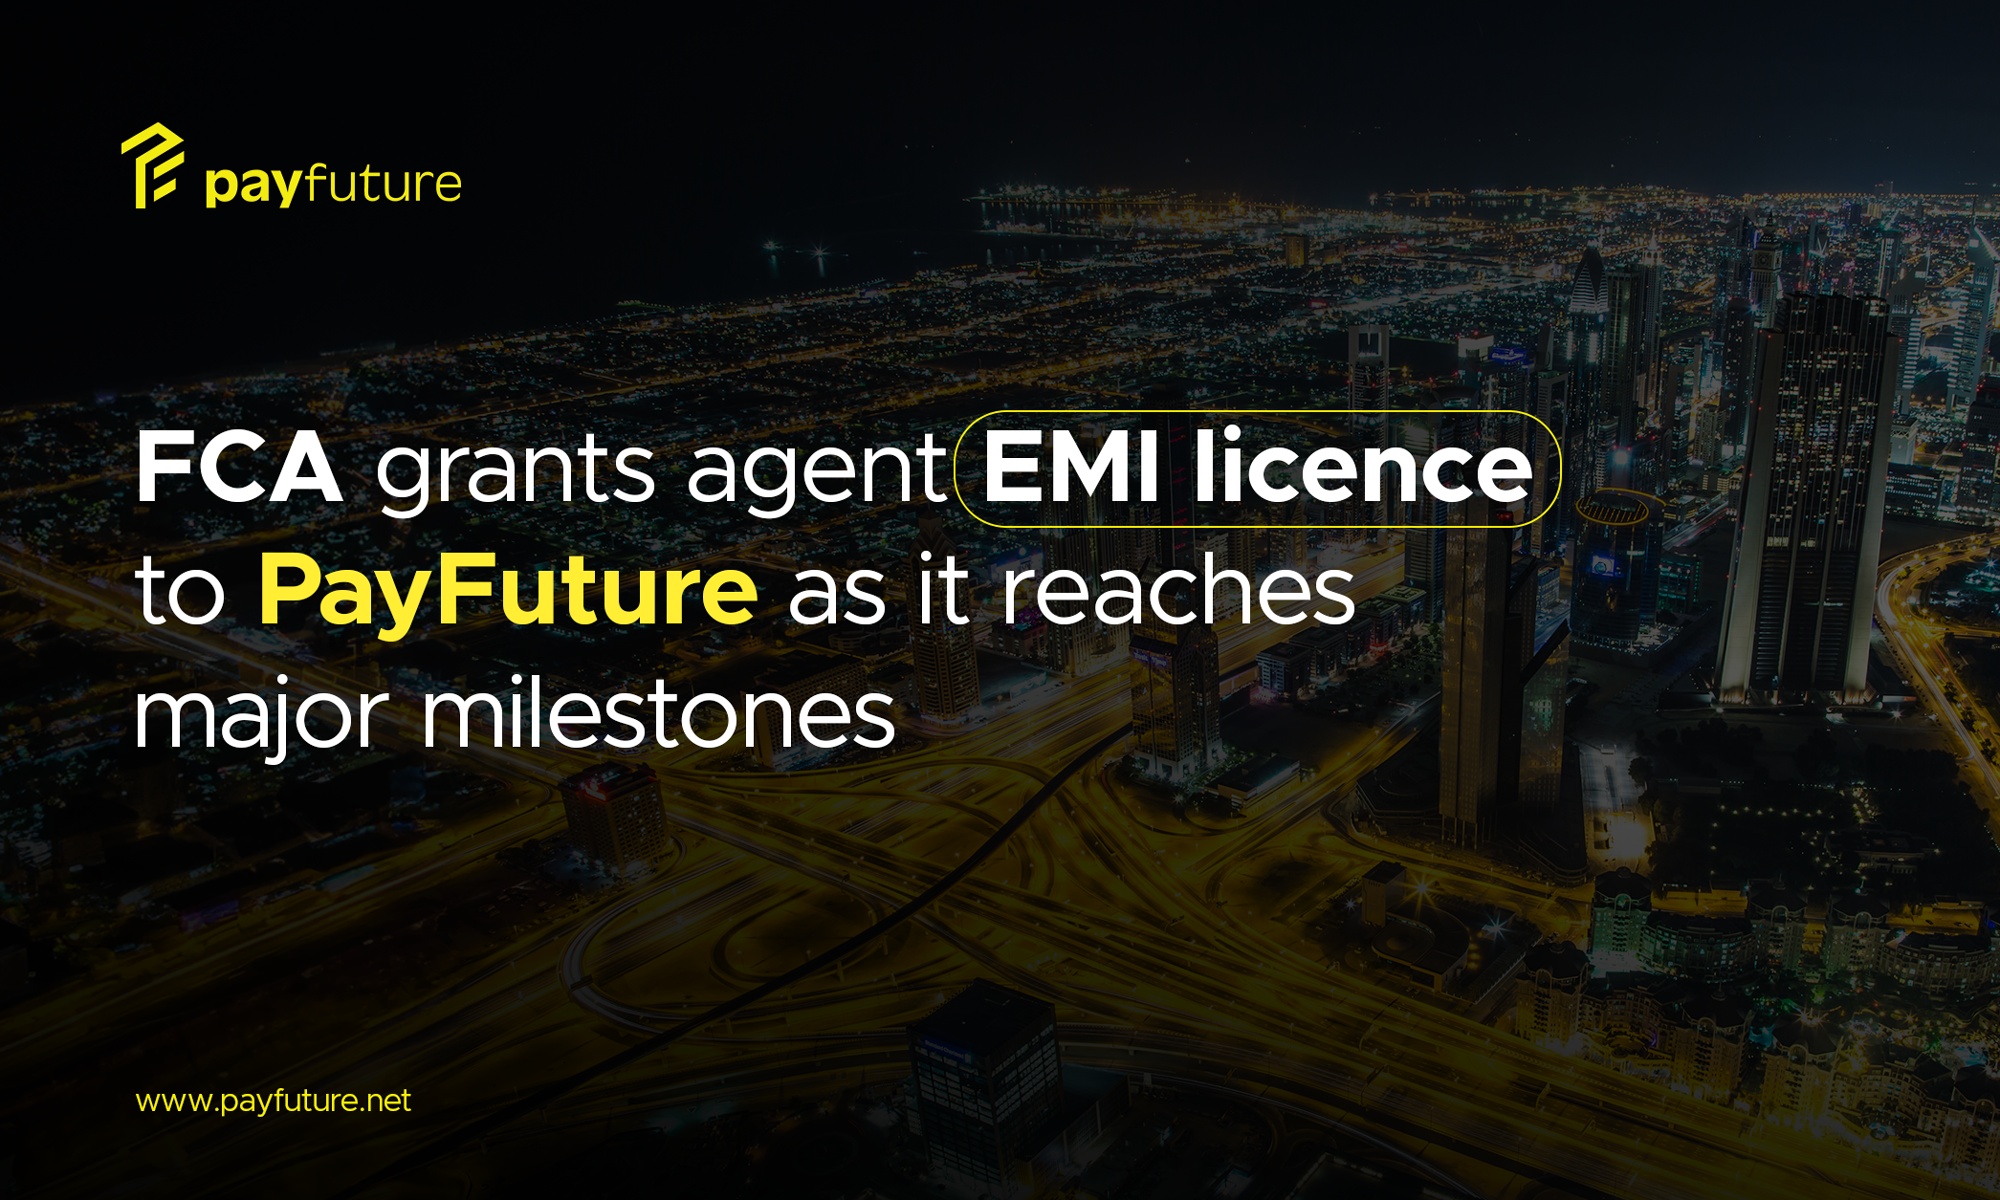 FCA grants agent EMI licence to PayFuture as it reaches major milestones